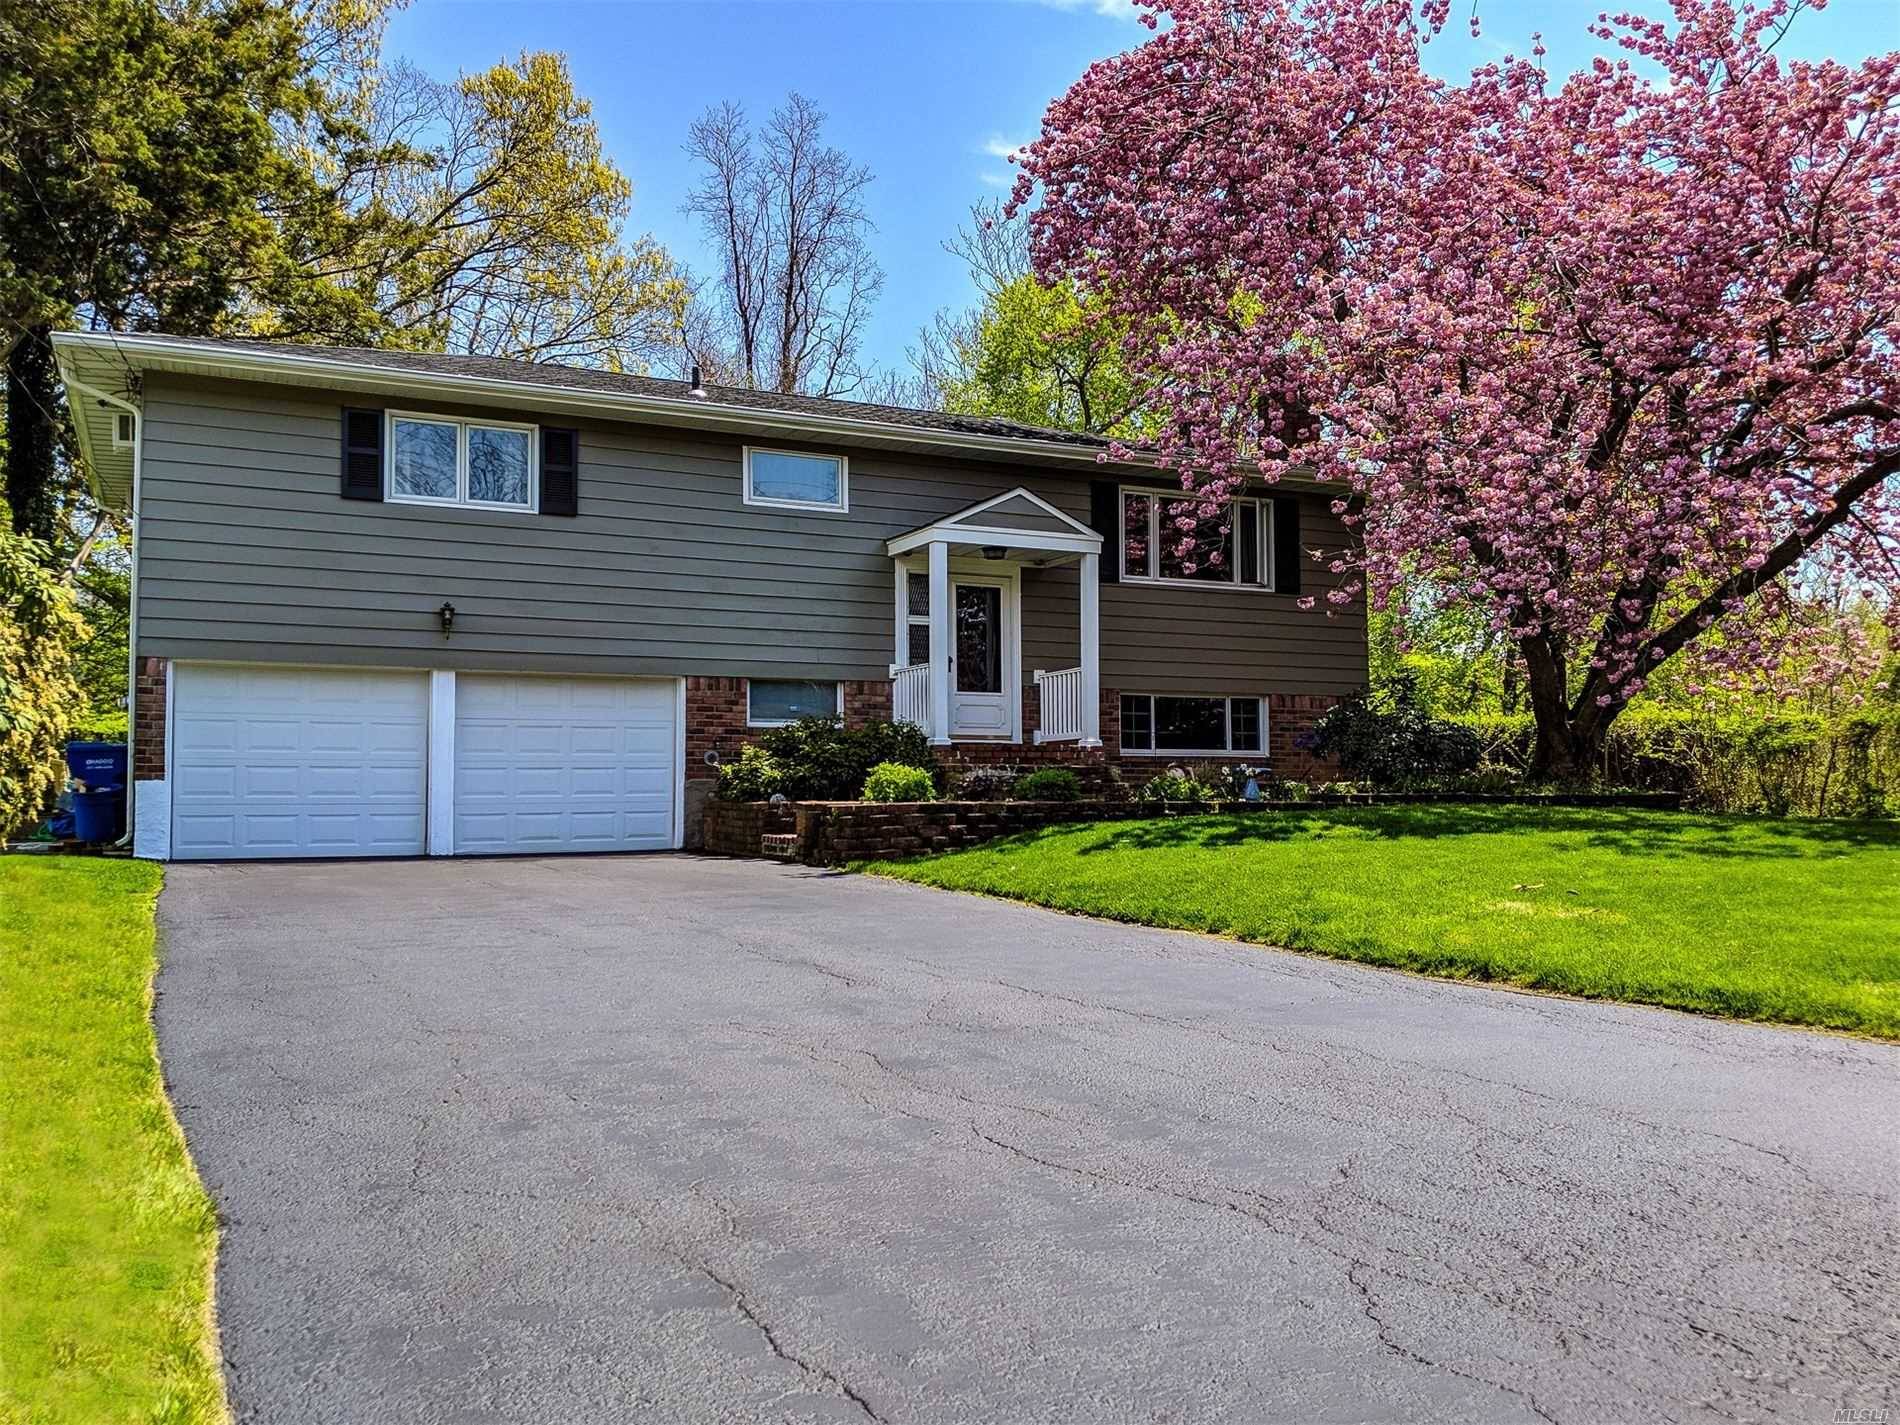 An Amazing Opportunity To Own A Meticulously Maintained And Updated Home In A Quiet Neighborhood, Just Minuets Away From The Water, Beach And Village !